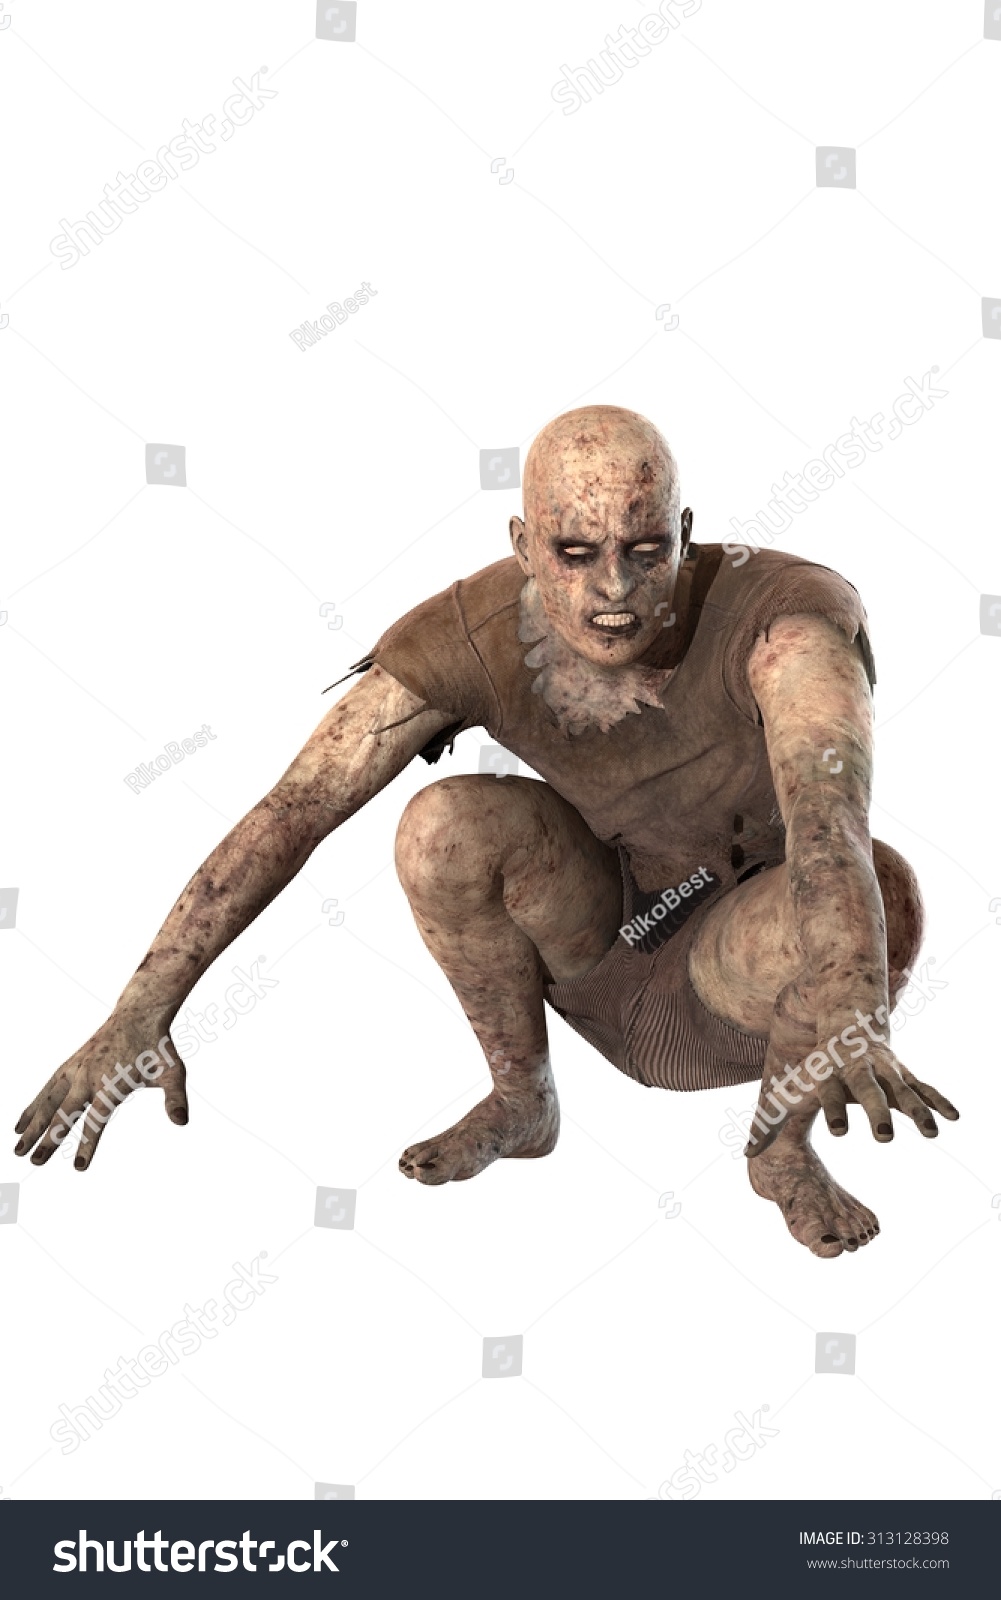 Zombie Isolated On White Background Stock Photo 313128398 : Shutterstock